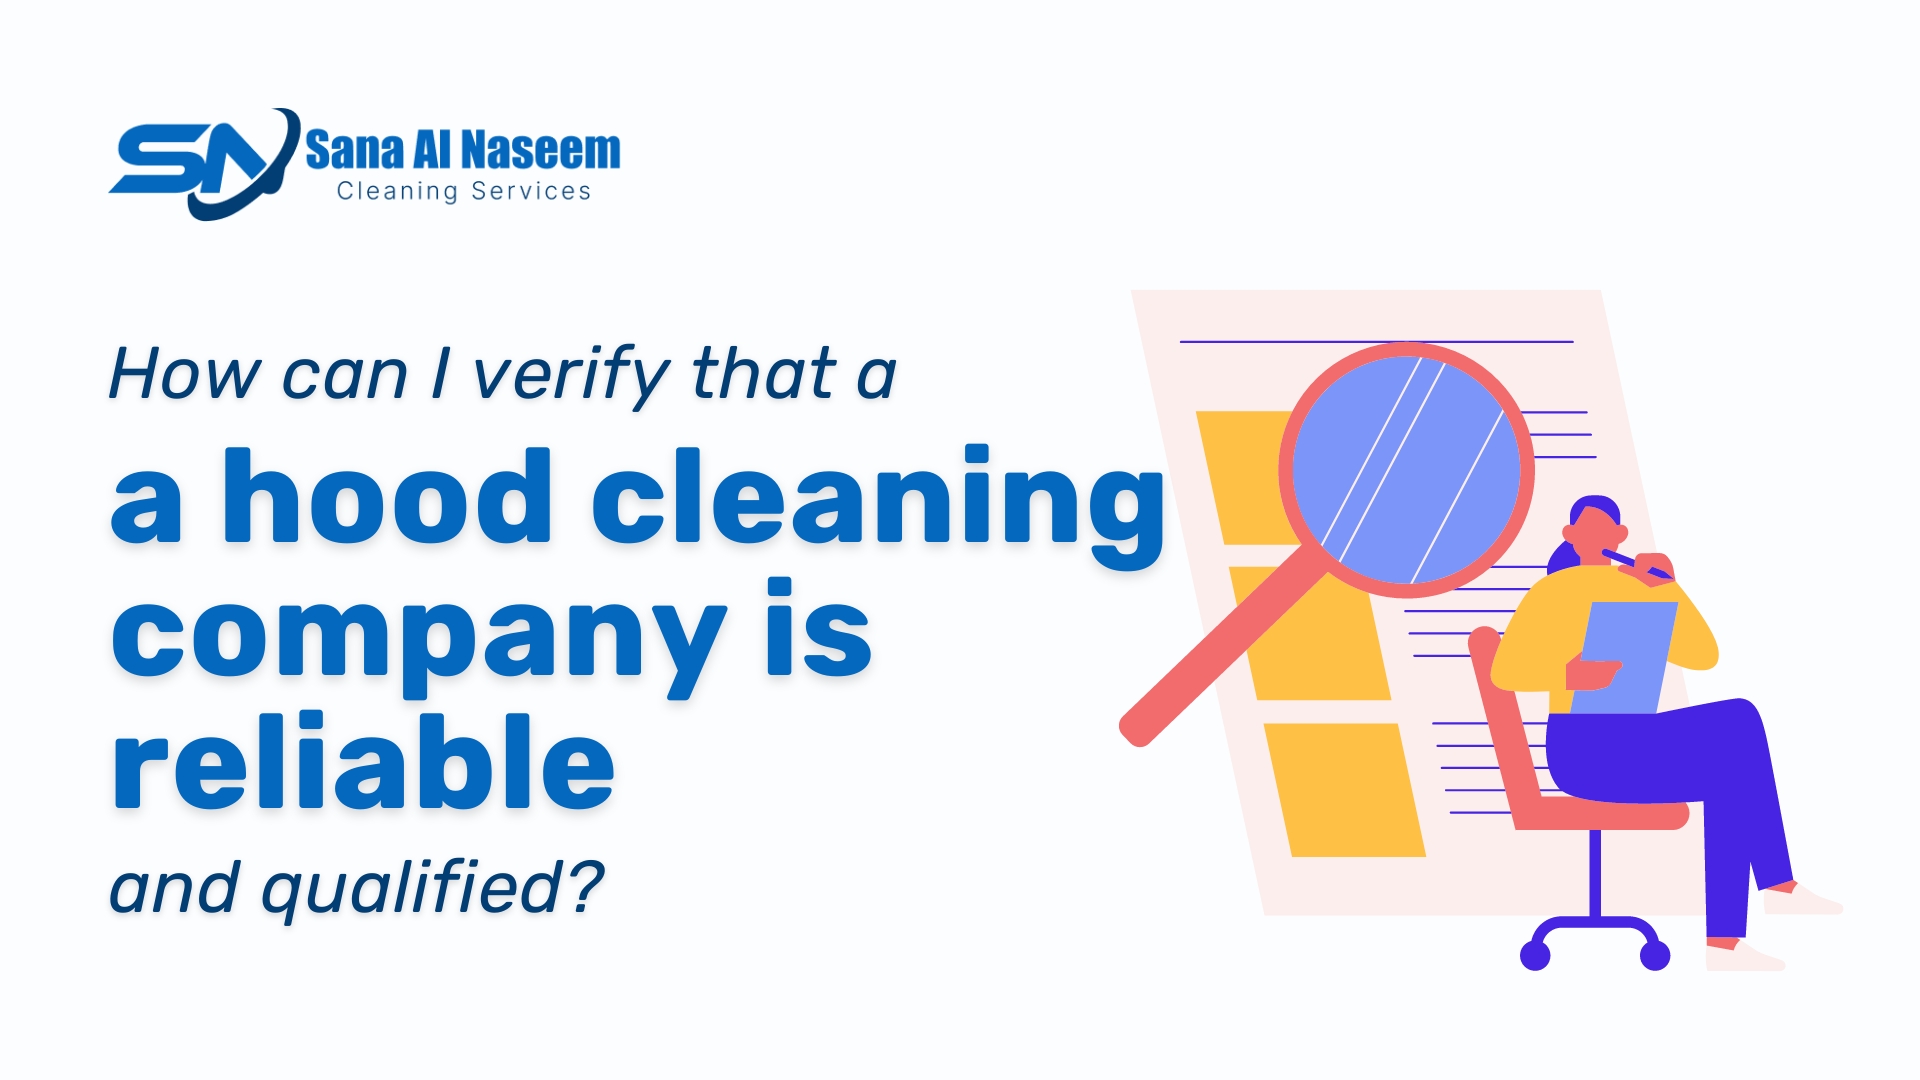 How can I verify that a hood cleaning company is reliable and qualified